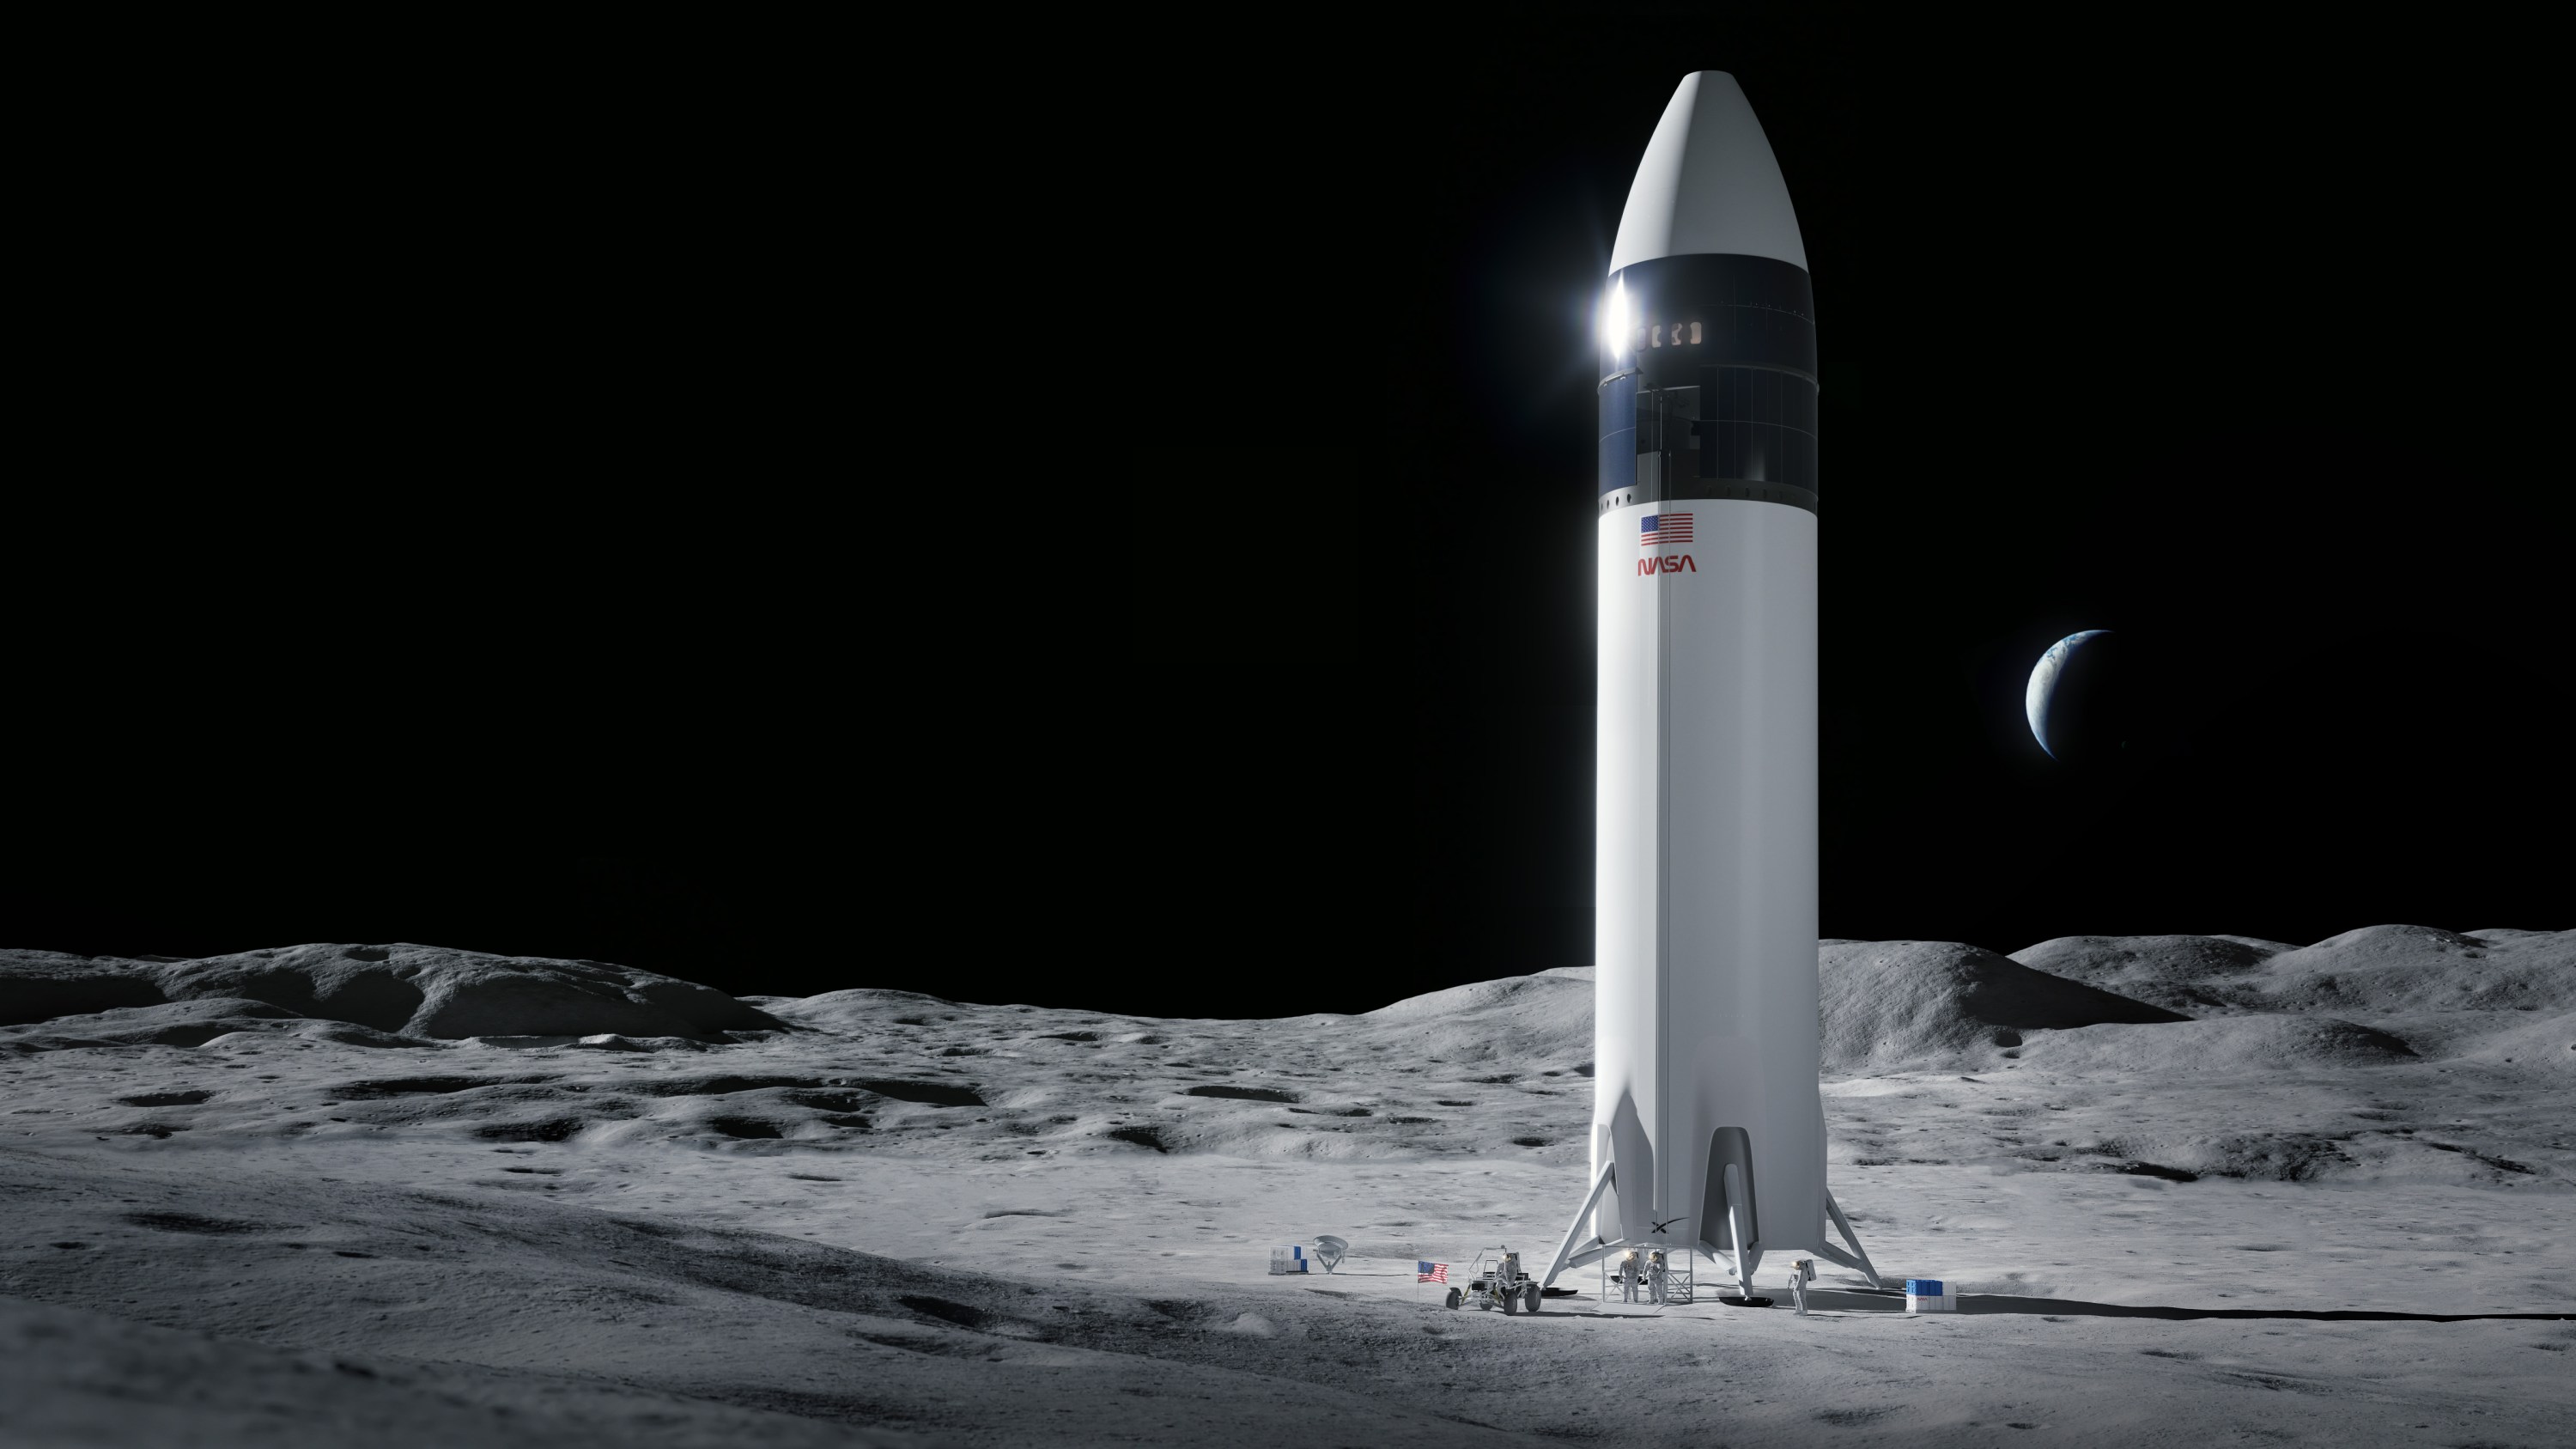 NASA selects SpaceX's Starship as the lander to take astronauts to the moon | MIT Technology Review